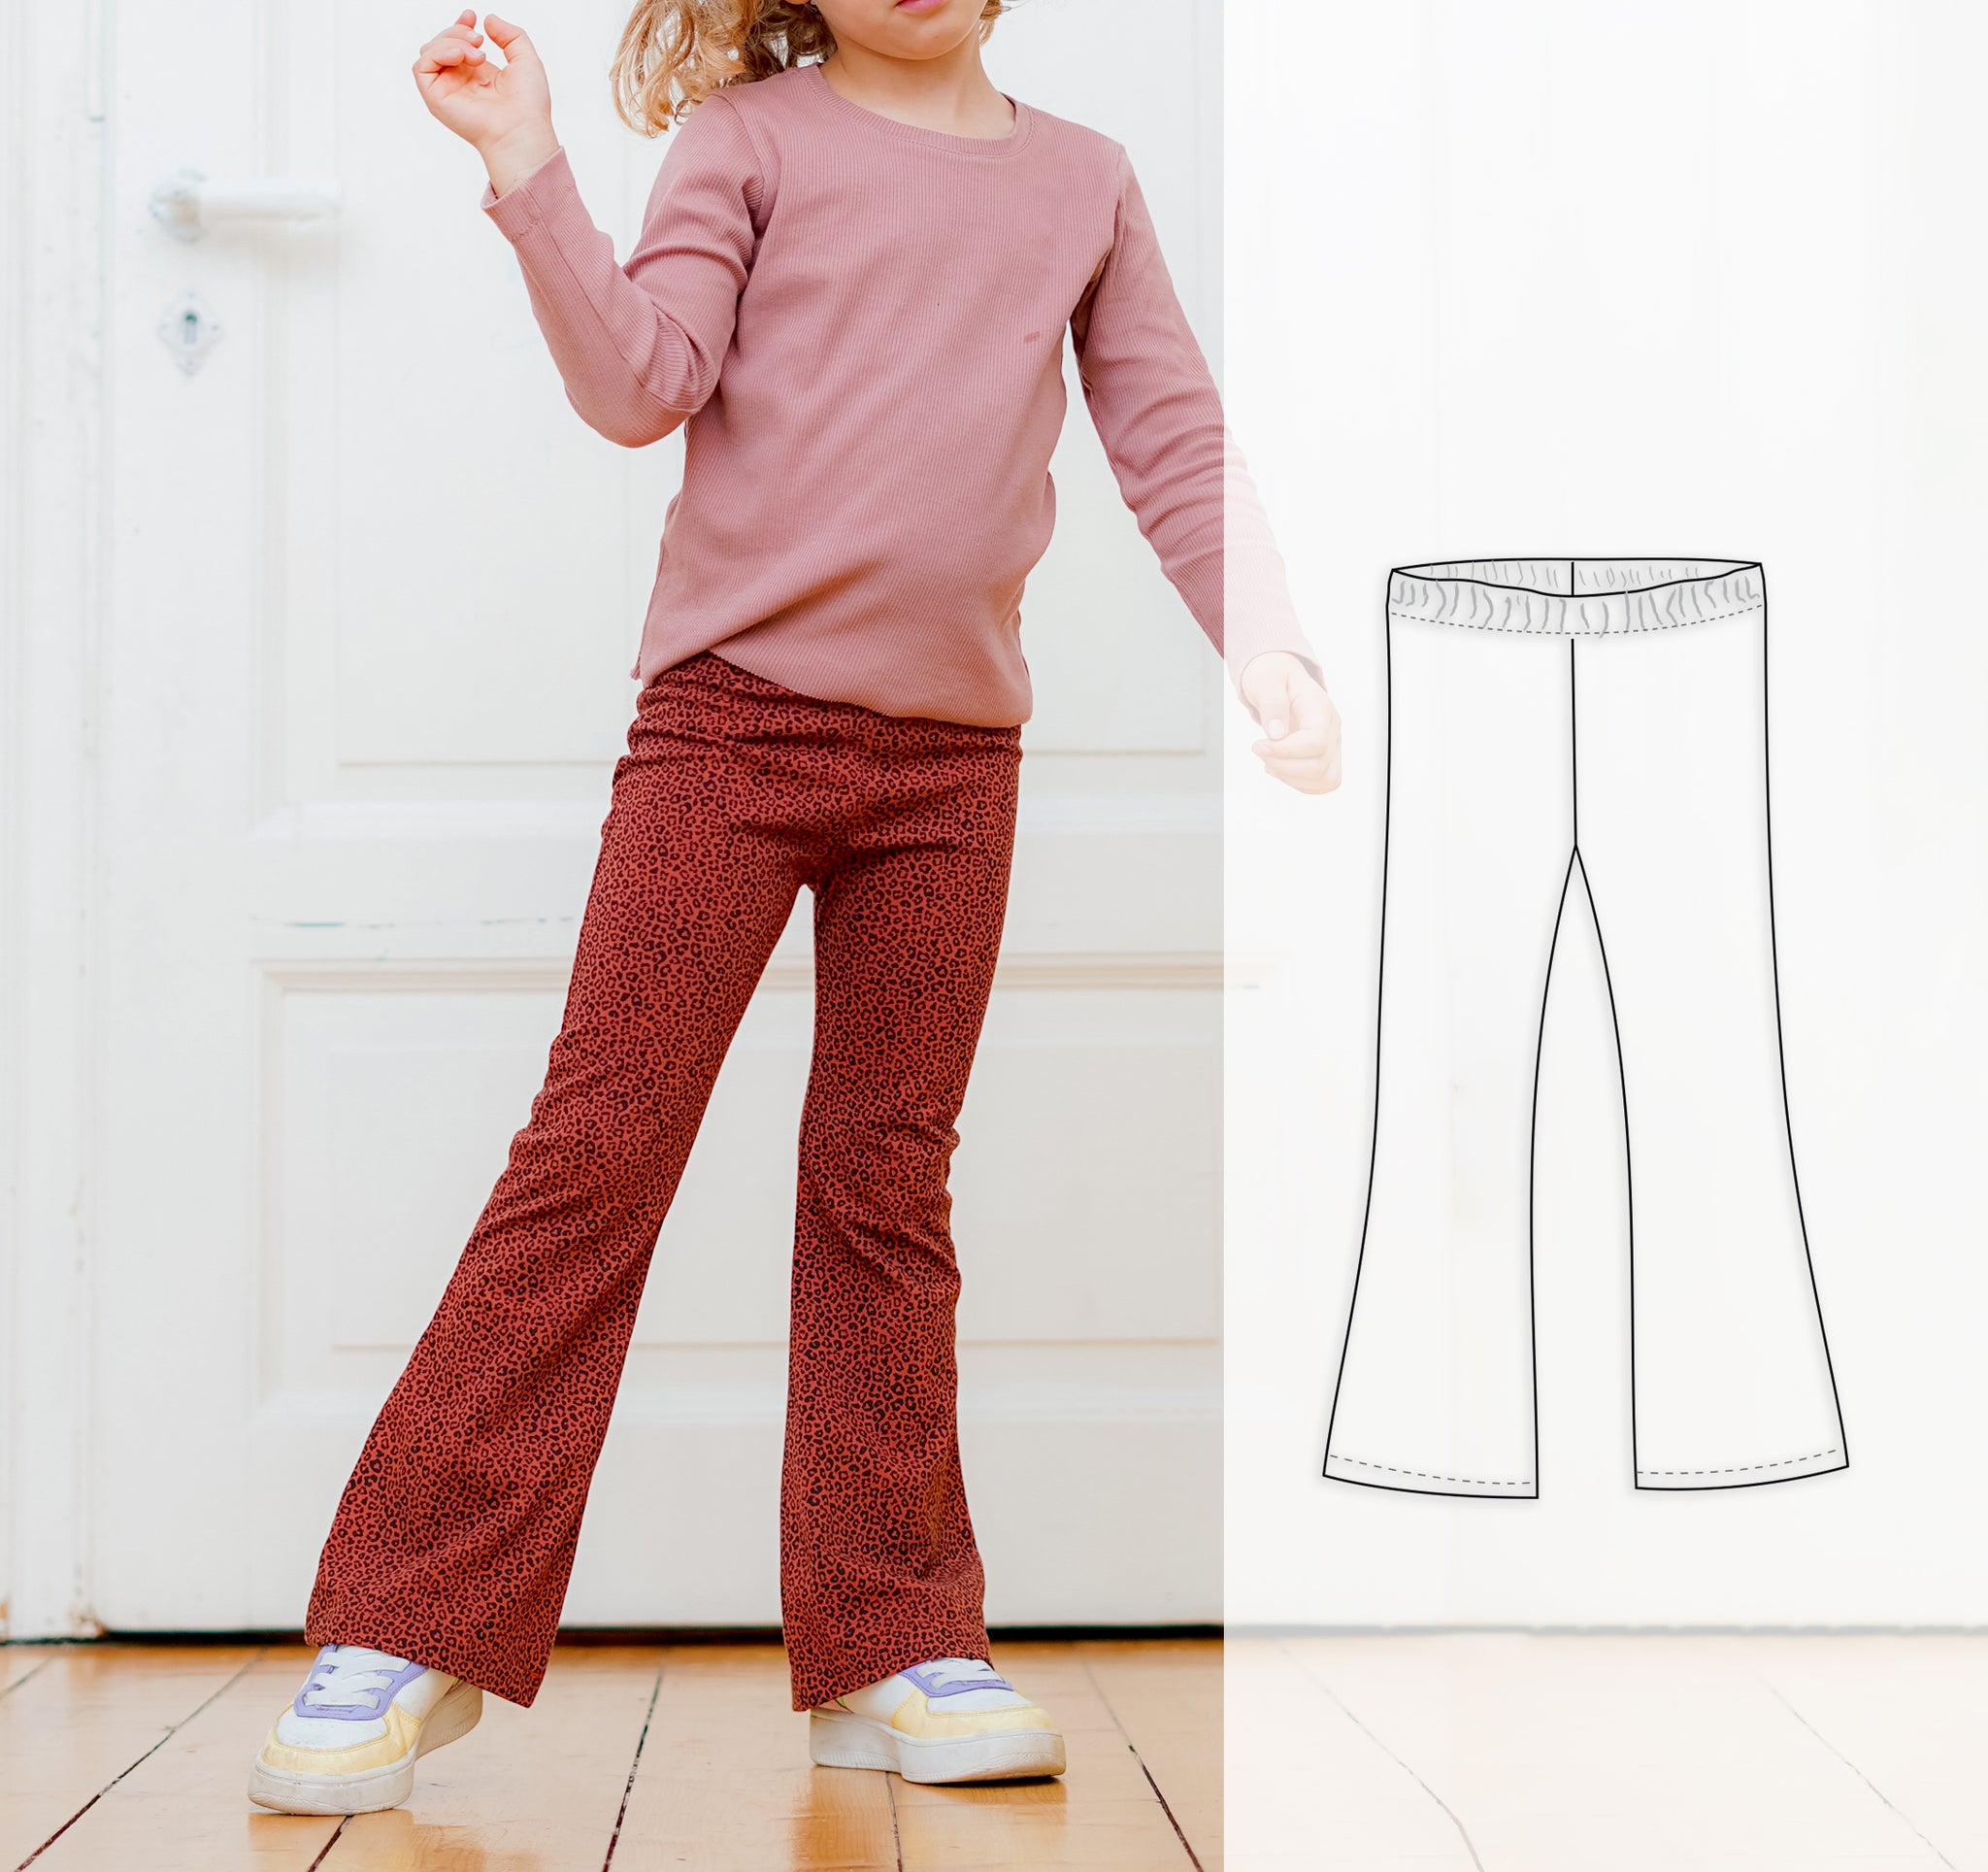 Flare leggings sewing pattern for children up to 10 years, girl's